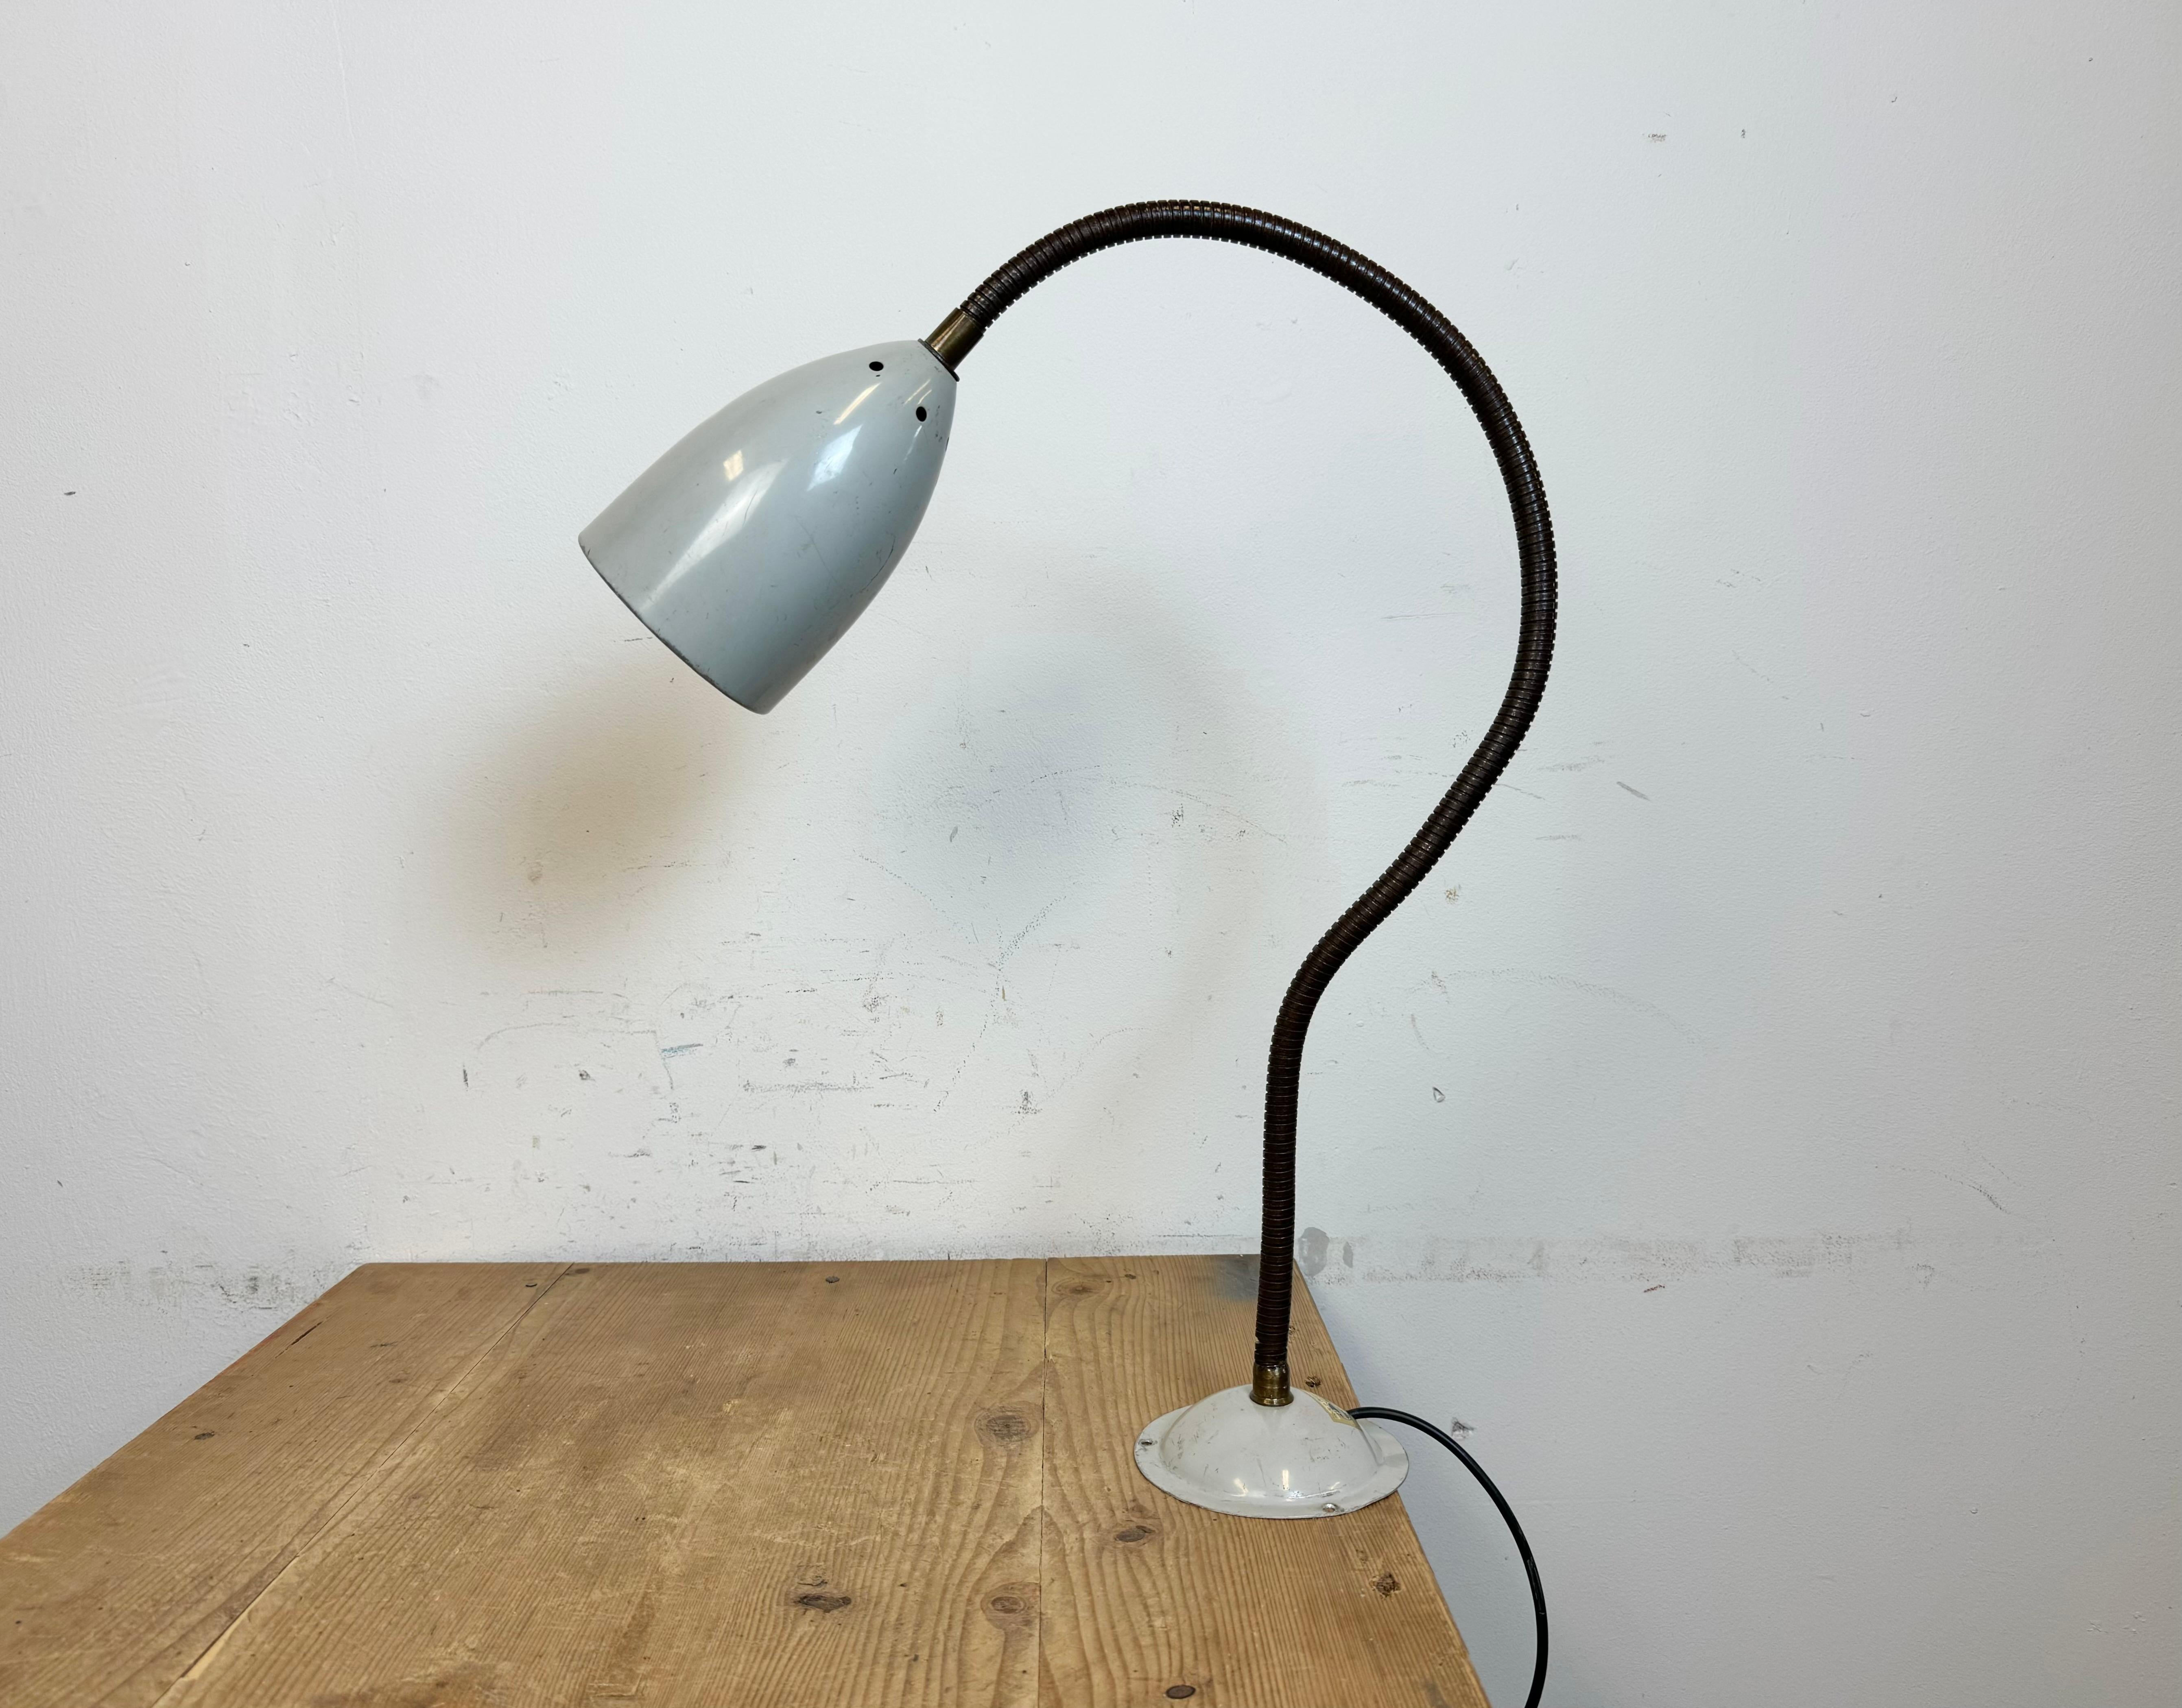 Industrial adjustable workshop table lamp made by Philips in Belgium during the 1960s.It features a grey metal base and shade and a iron gooseneck. The original socket requires standard E27/E26 lightbulbs.
The diameter of the shade is 10 cm. The